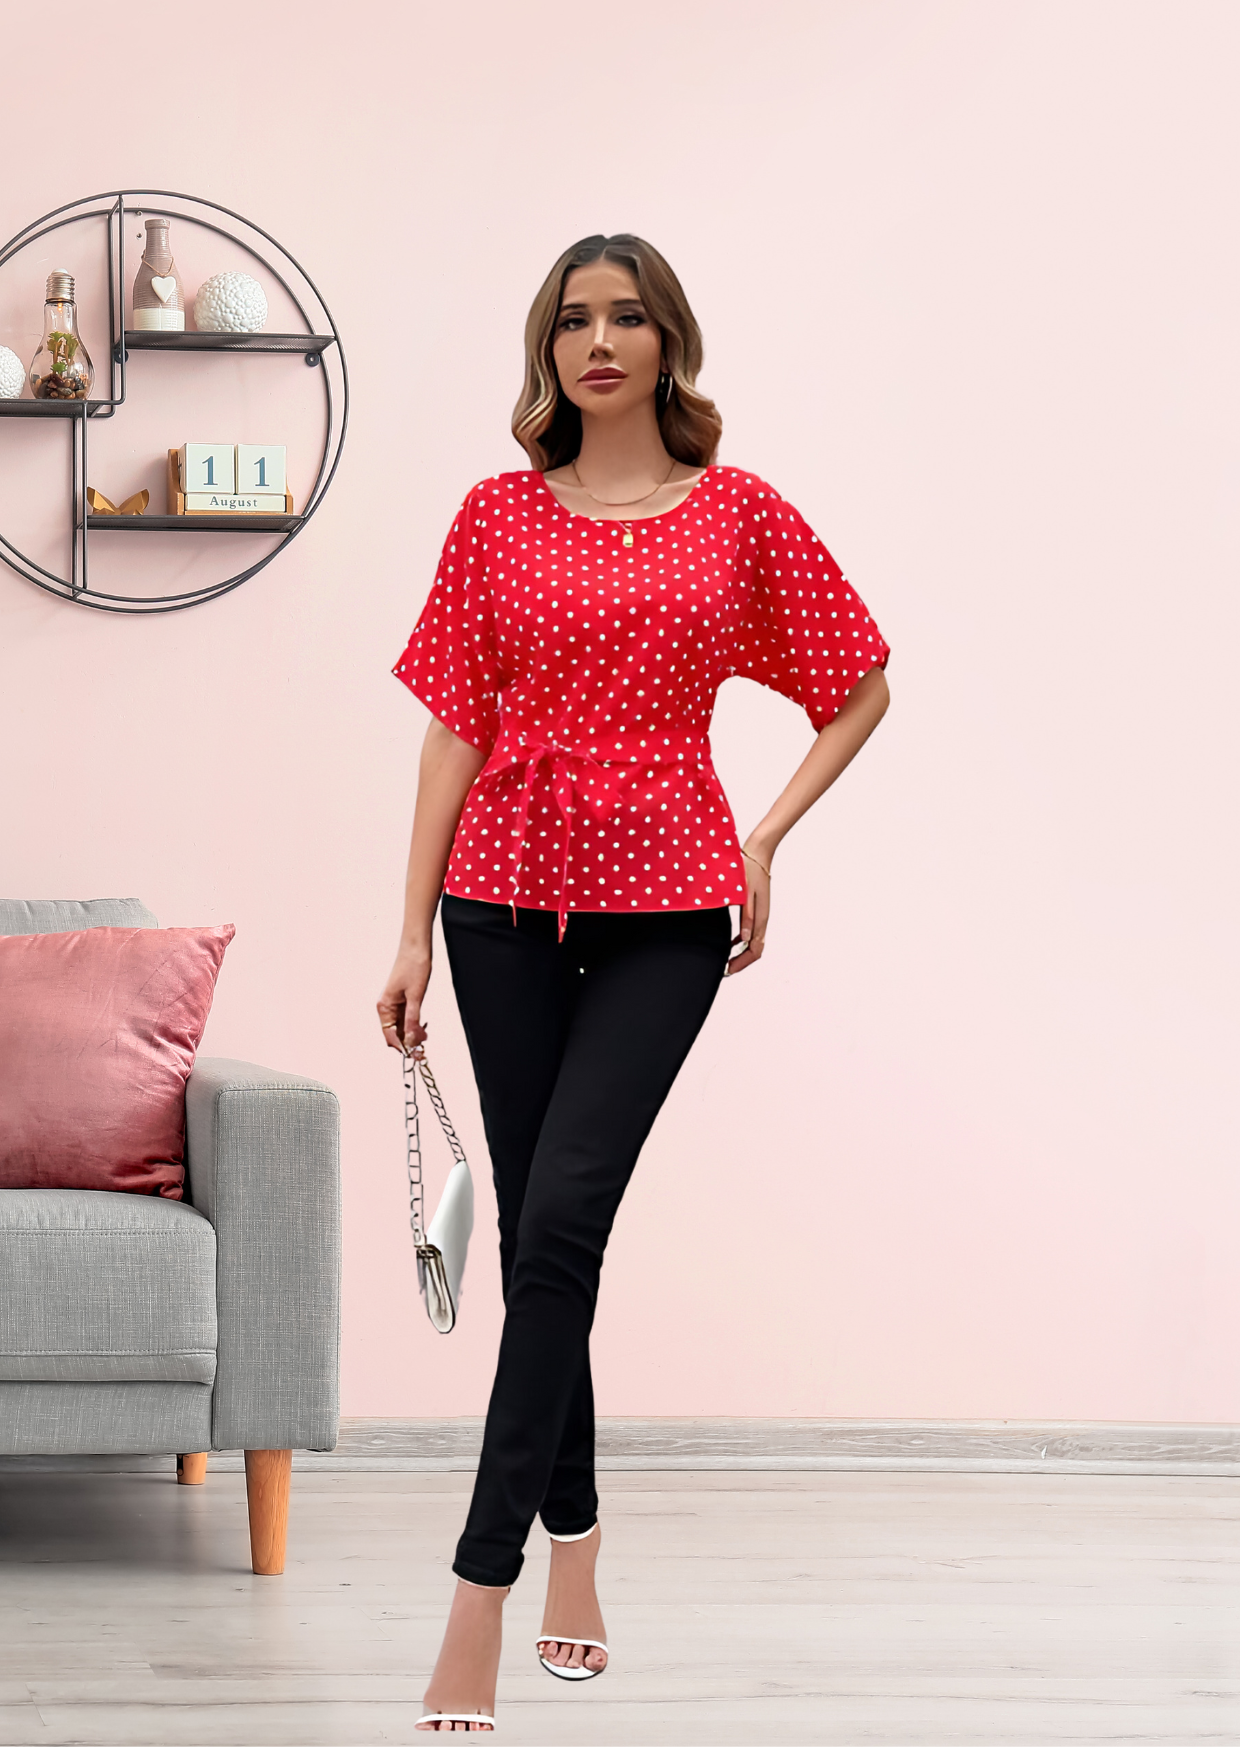 Red printed top for women